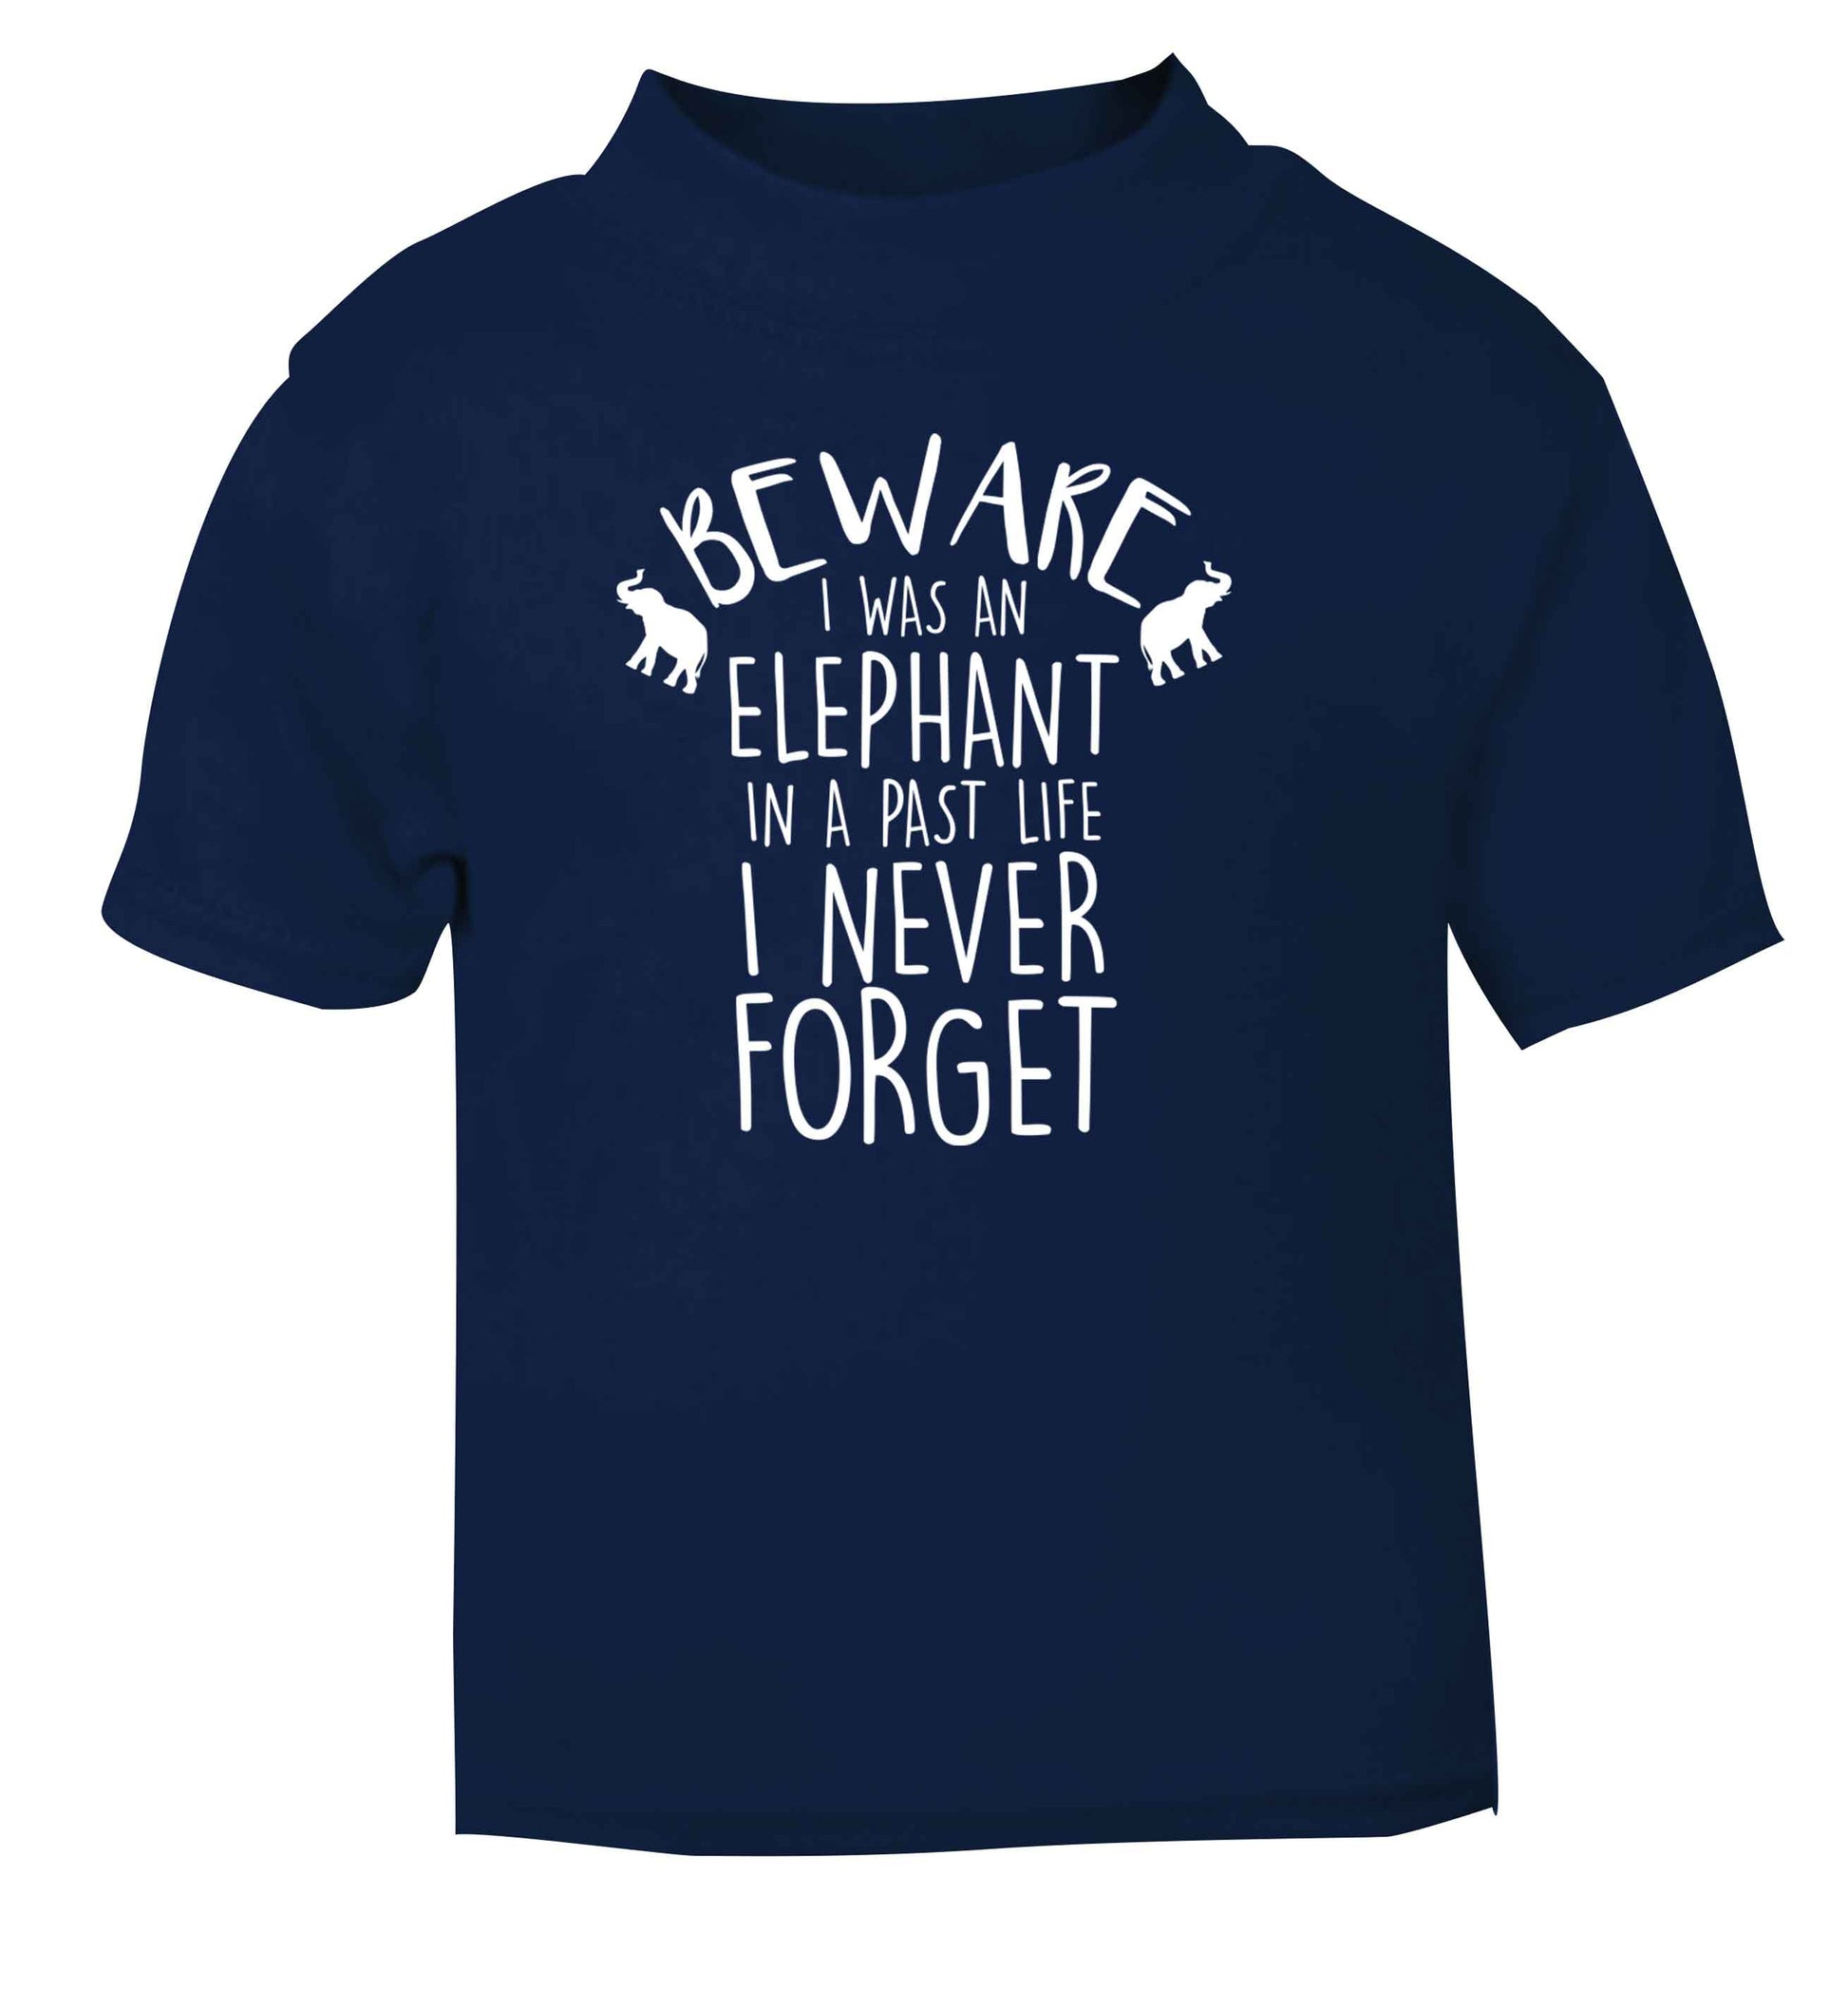 Beware I was an elephant in my past life I never forget navy Baby Toddler Tshirt 2 Years